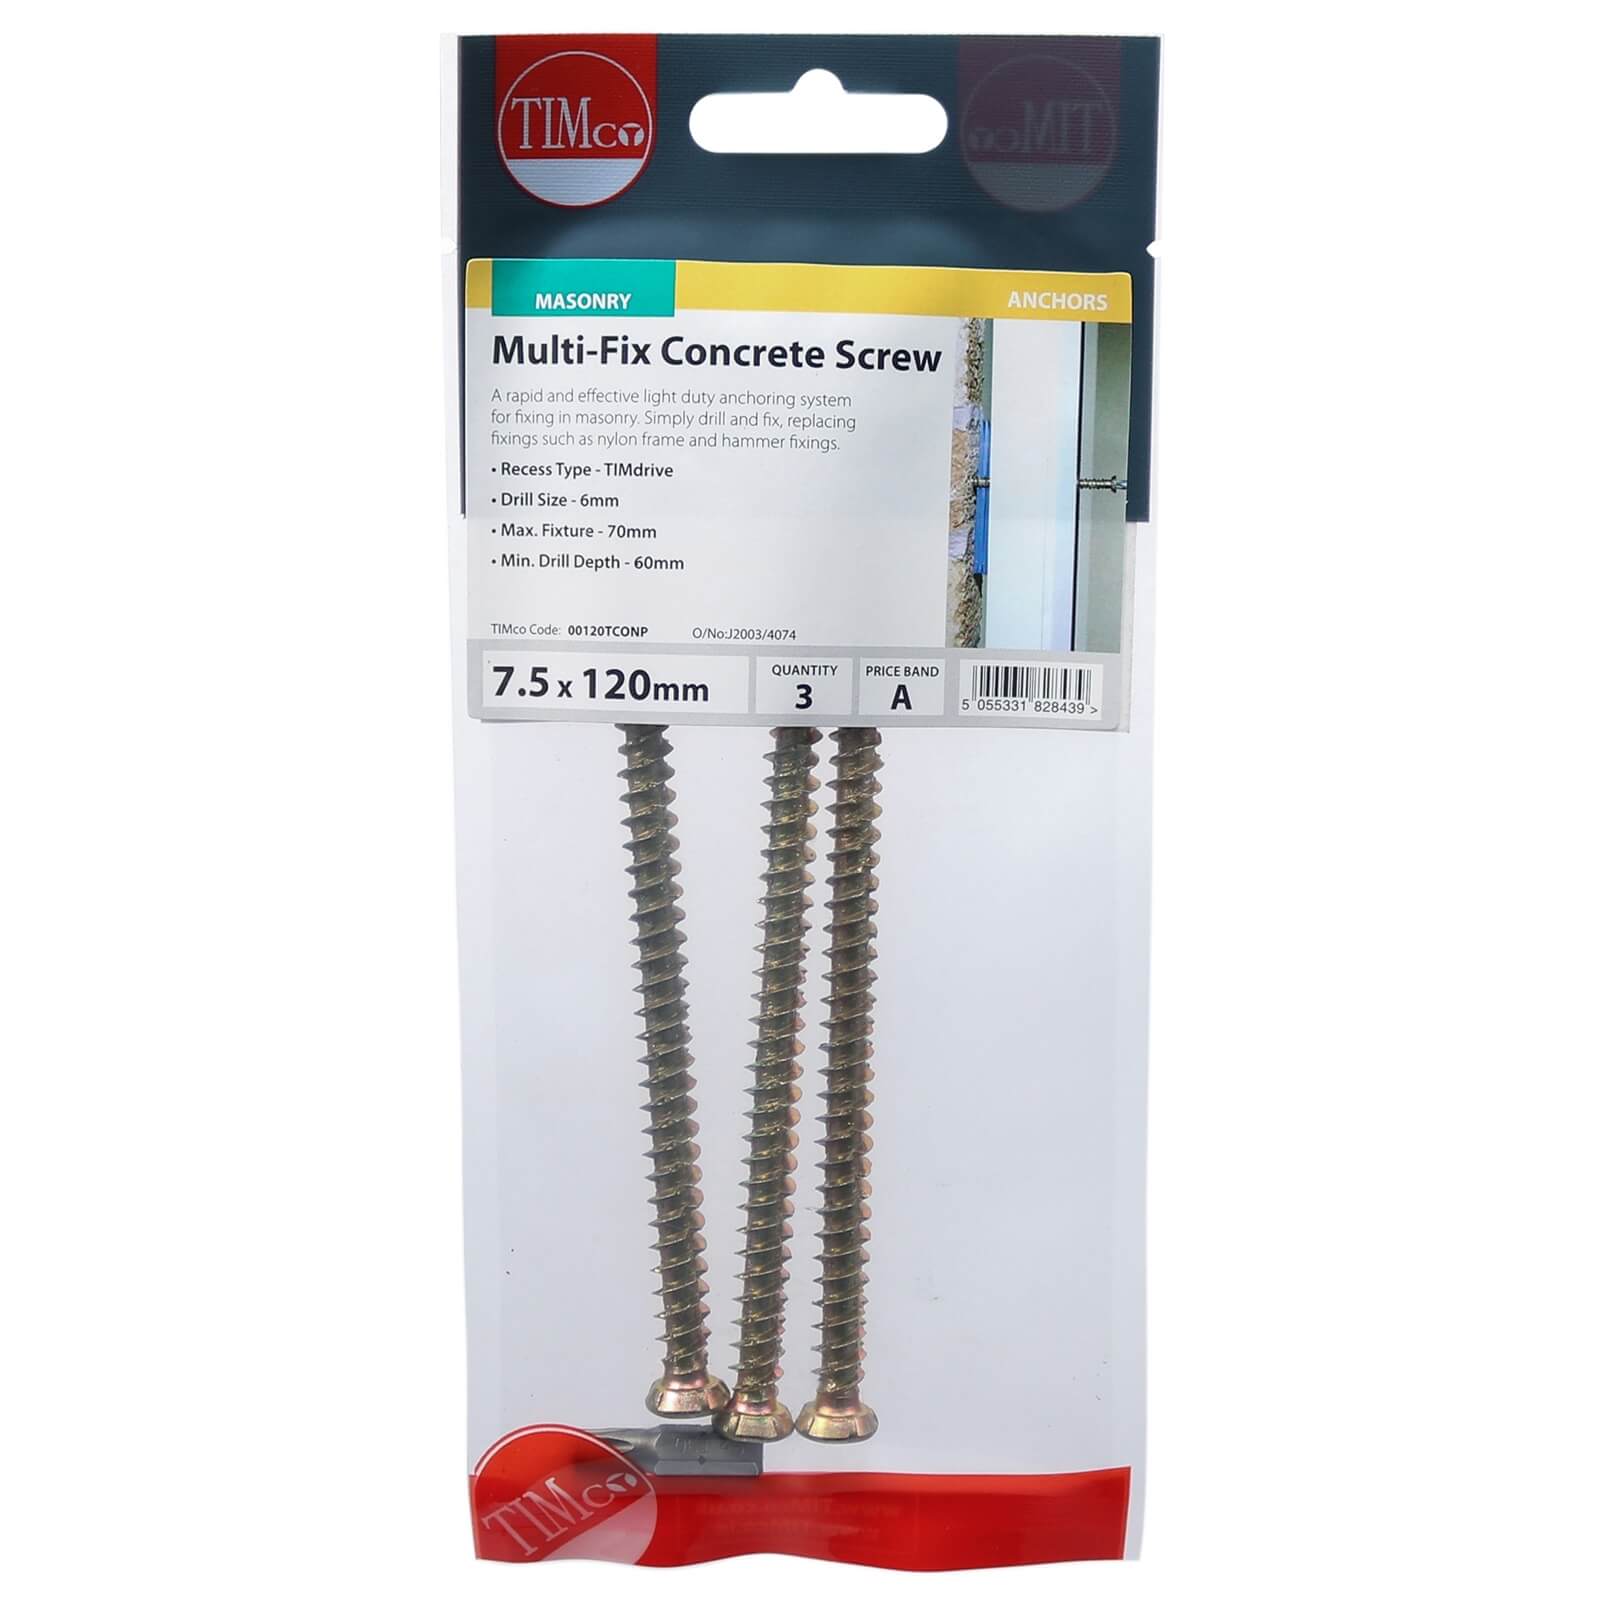 Concrete Screw Zyp 7.5mm x 120mm - Pack of 3